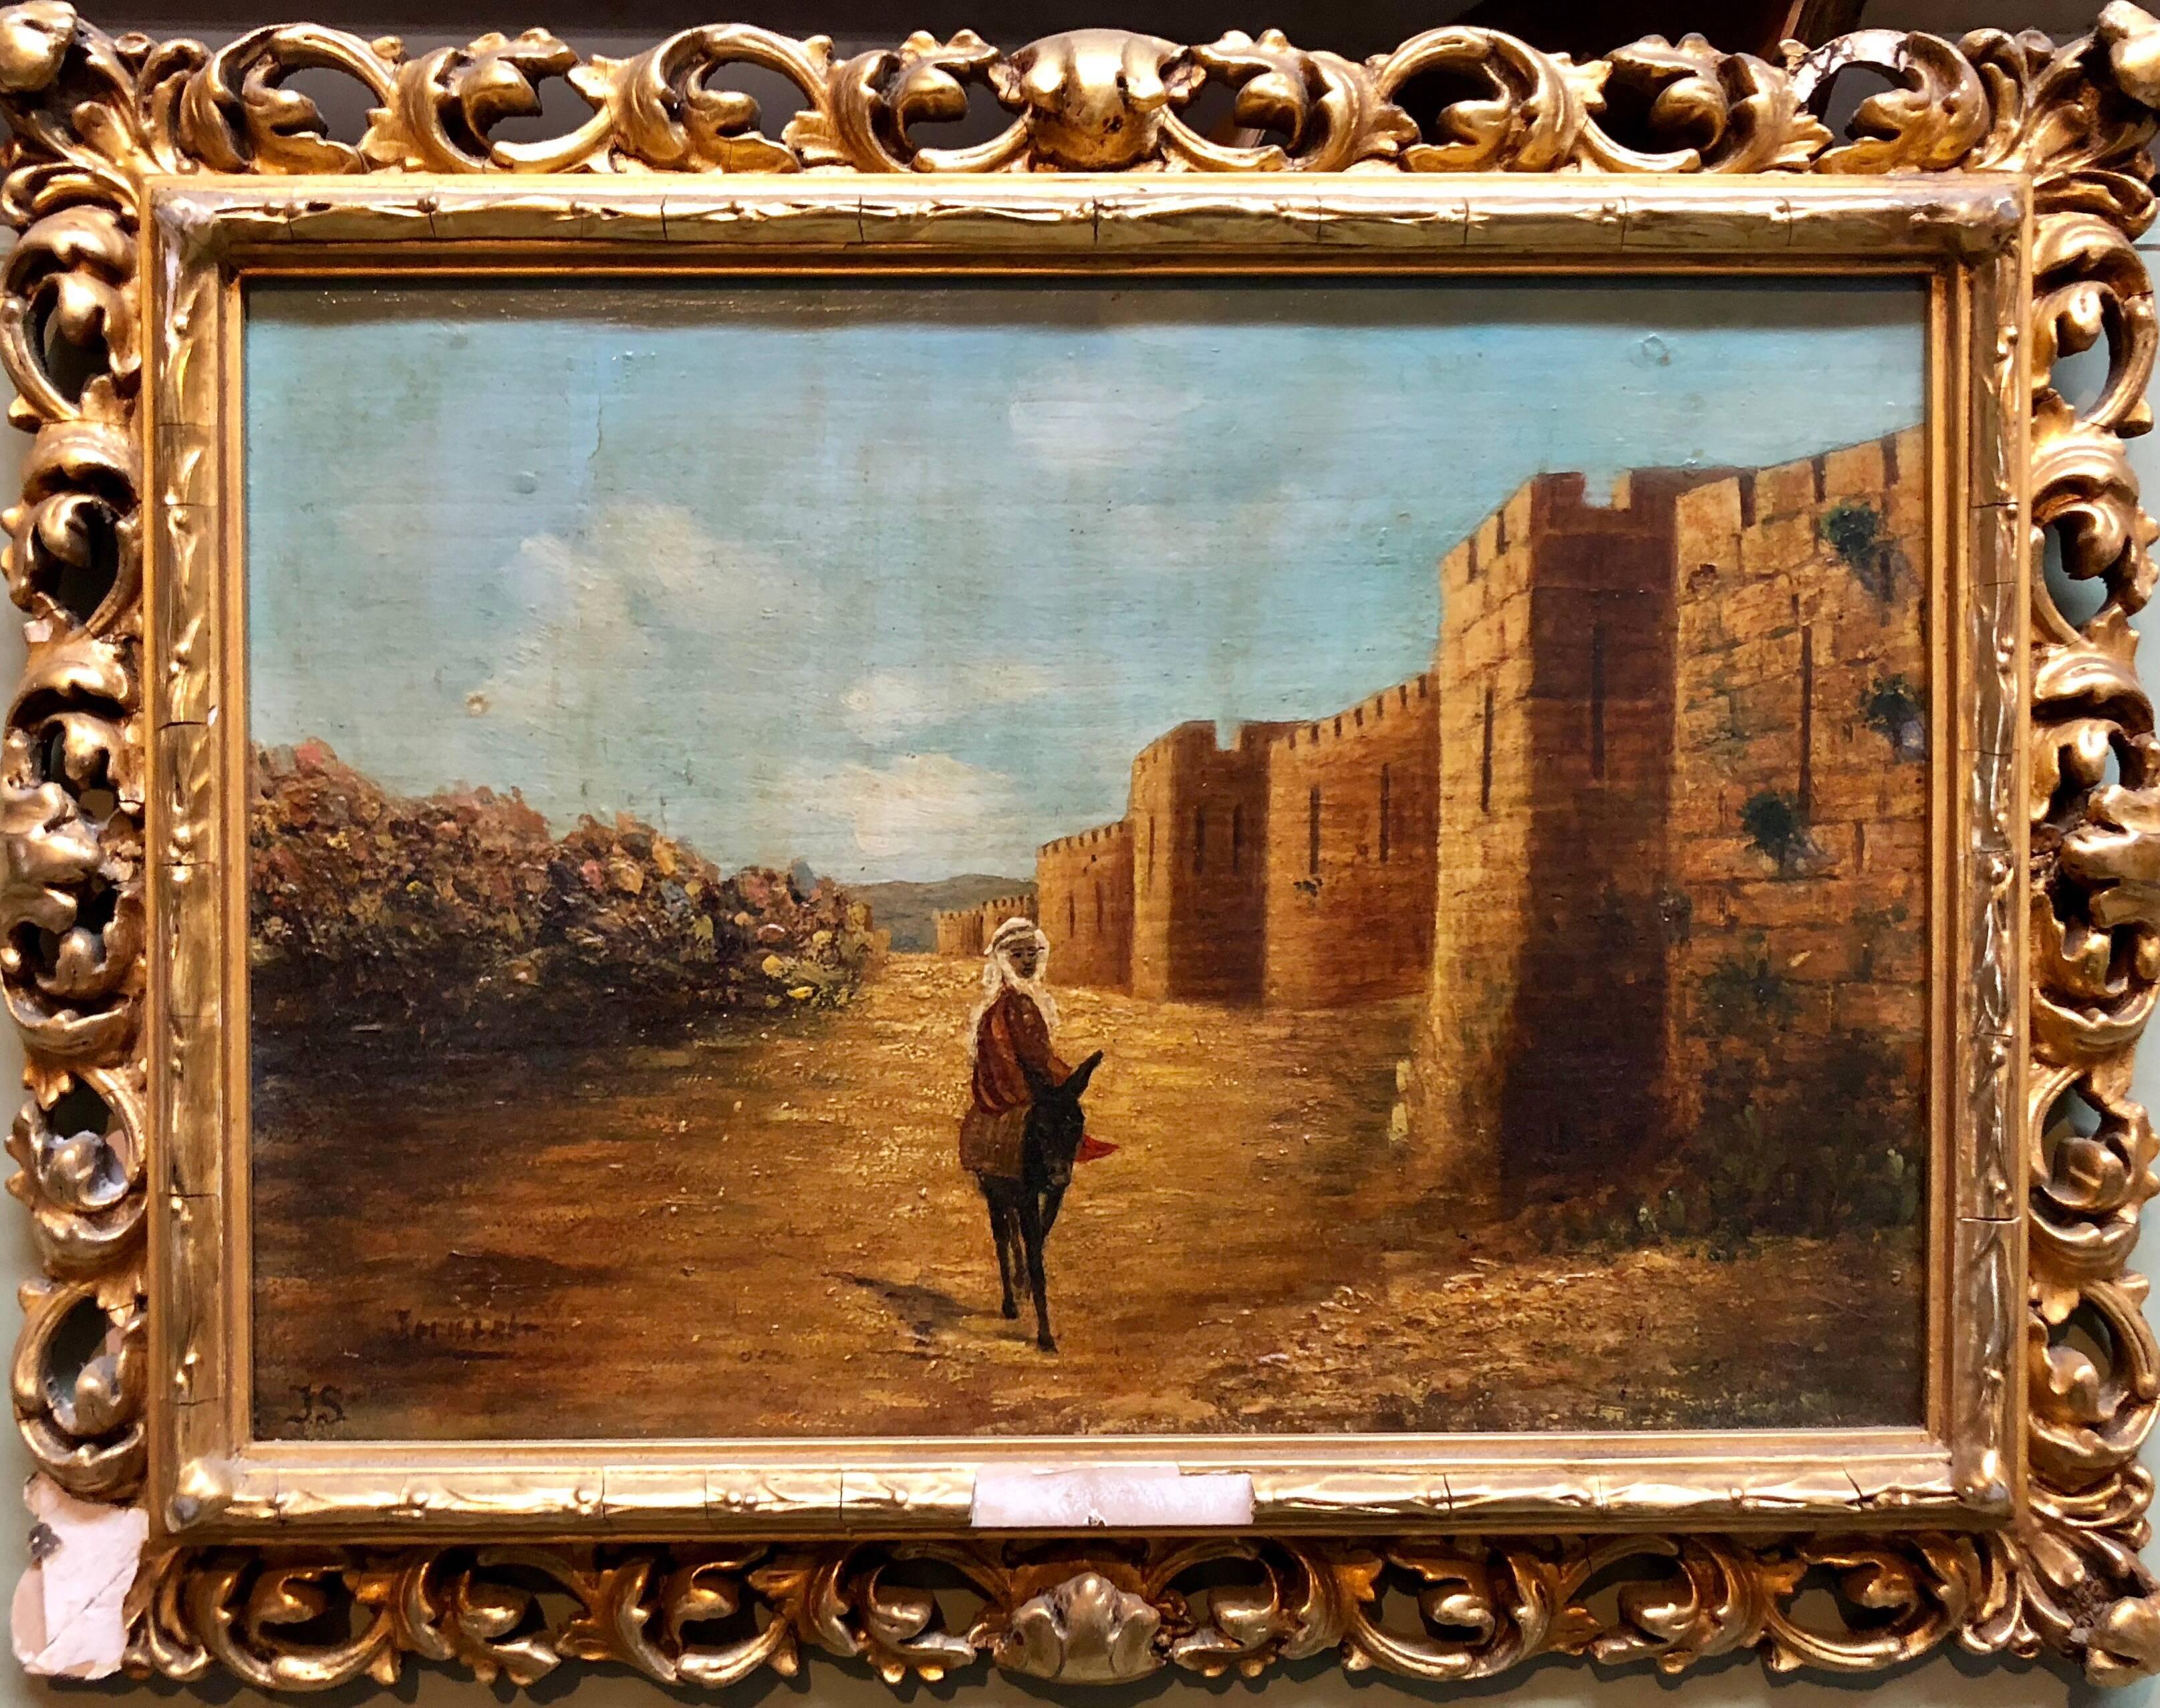 Unknown Figurative Painting - Antique Oil Painting Of Jerusalem Ascent to Old City Walls